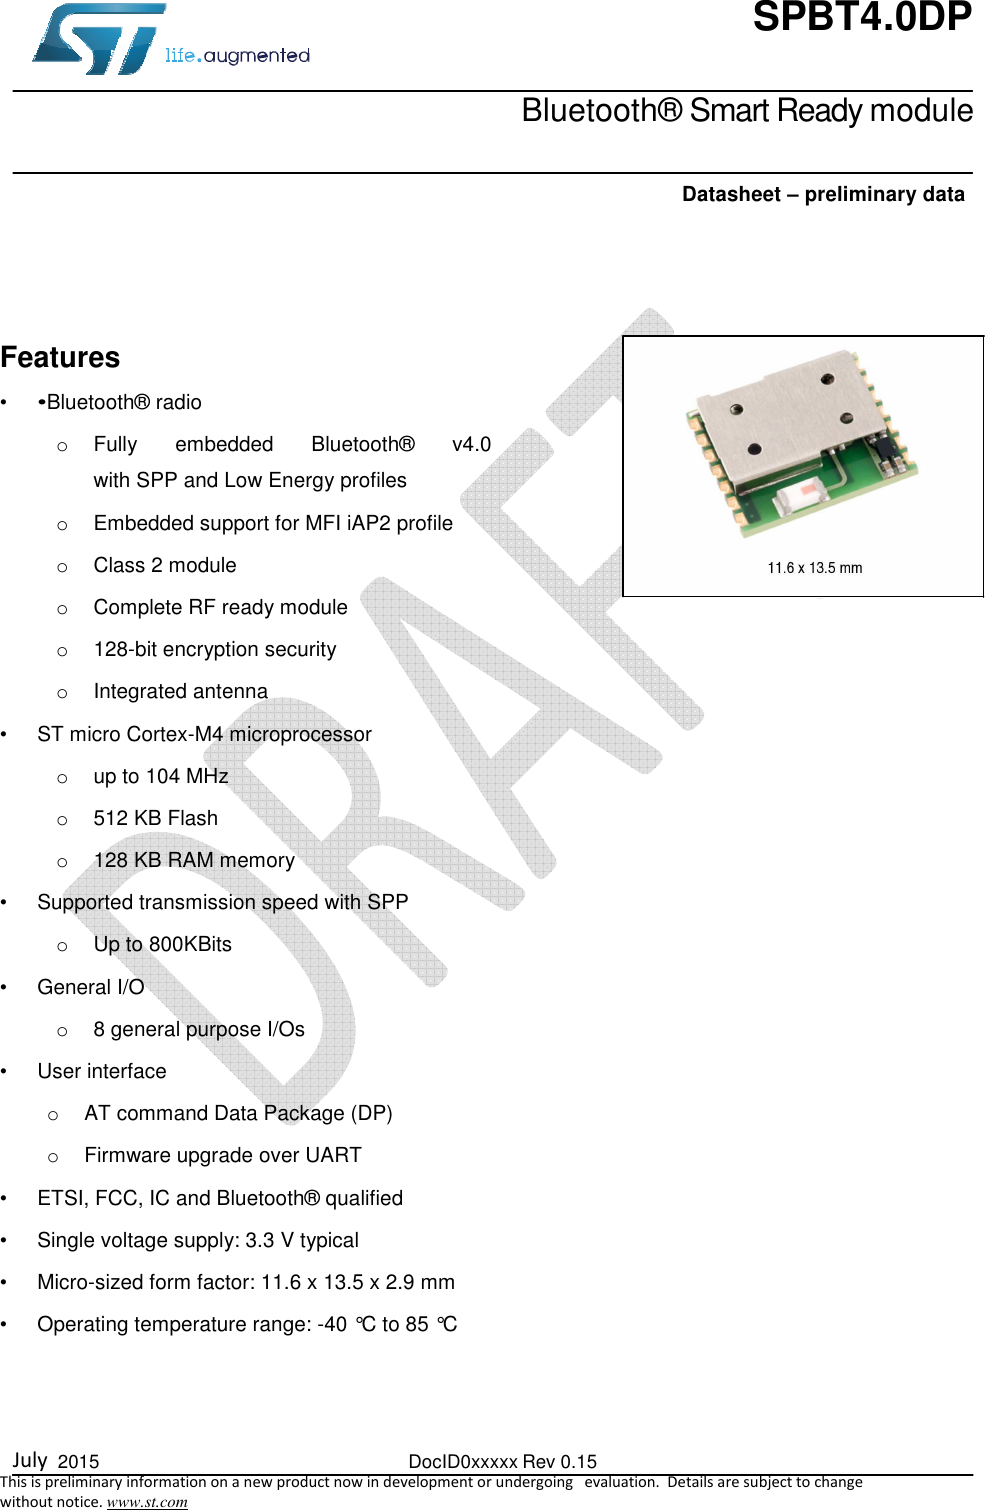  July  2015  DocID0xxxxx Rev 0.15   This is preliminary information on a new product now in development or undergoing   evaluation.  Details are subject to change  without notice. www.st.com SPBT4.0DP    Bluetooth® Smart Ready module    Datasheet – preliminary data  Features  • •Bluetooth® radio o  Fully  embedded  Bluetooth®  v4.0  with SPP and Low Energy profiles o  Embedded support for MFI iAP2 profile o  Class 2 module o  Complete RF ready module o  128-bit encryption security o  Integrated antenna •  ST micro Cortex-M4 microprocessor  o  up to 104 MHz  o  512 KB Flash o  128 KB RAM memory •  Supported transmission speed with SPP o  Up to 800KBits •  General I/O o  8 general purpose I/Os •  User interface o  AT command Data Package (DP) o  Firmware upgrade over UART •  ETSI, FCC, IC and Bluetooth® qualified •  Single voltage supply: 3.3 V typical •  Micro-sized form factor: 11.6 x 13.5 x 2.9 mm •  Operating temperature range: -40 °C to 85 °C     